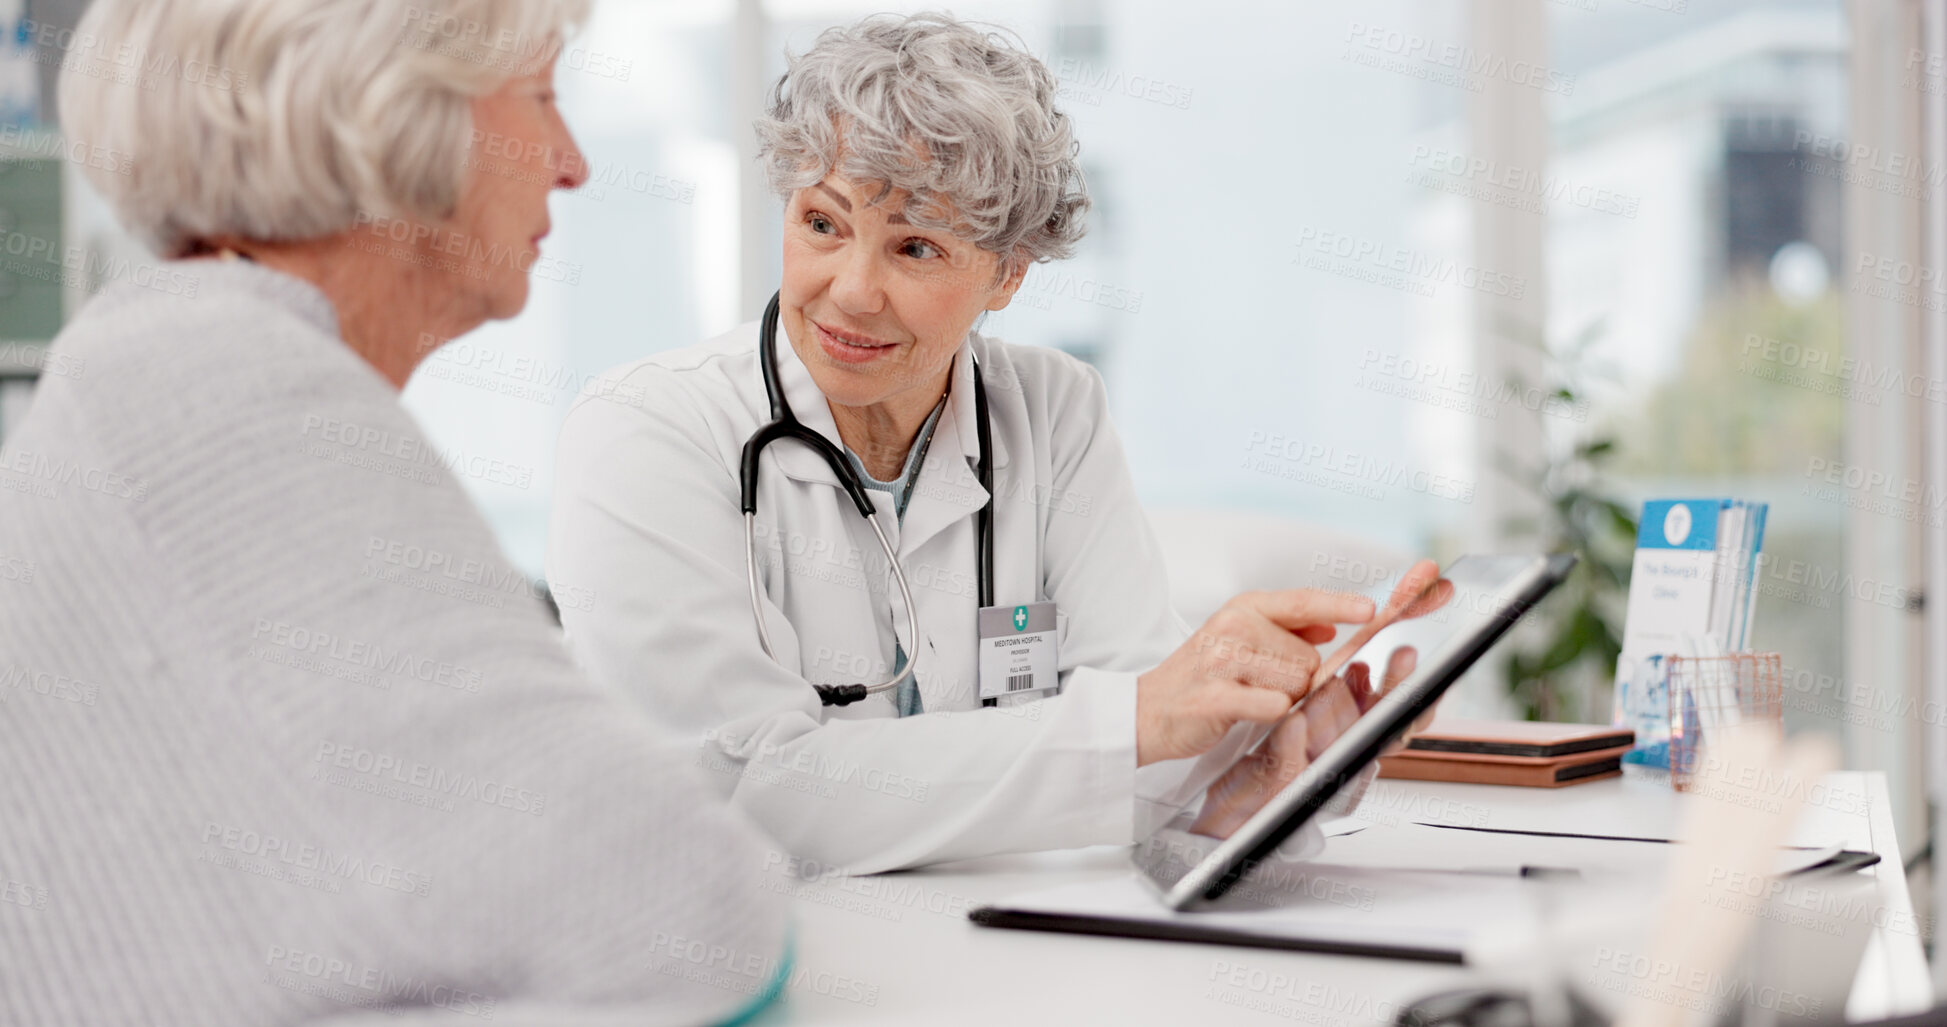 Buy stock photo Senior doctor, tablet and talking to patient for healthcare prescription or diagnosis at hospital. Mature medical professional consulting elderly female person on technology for help advice at clinic